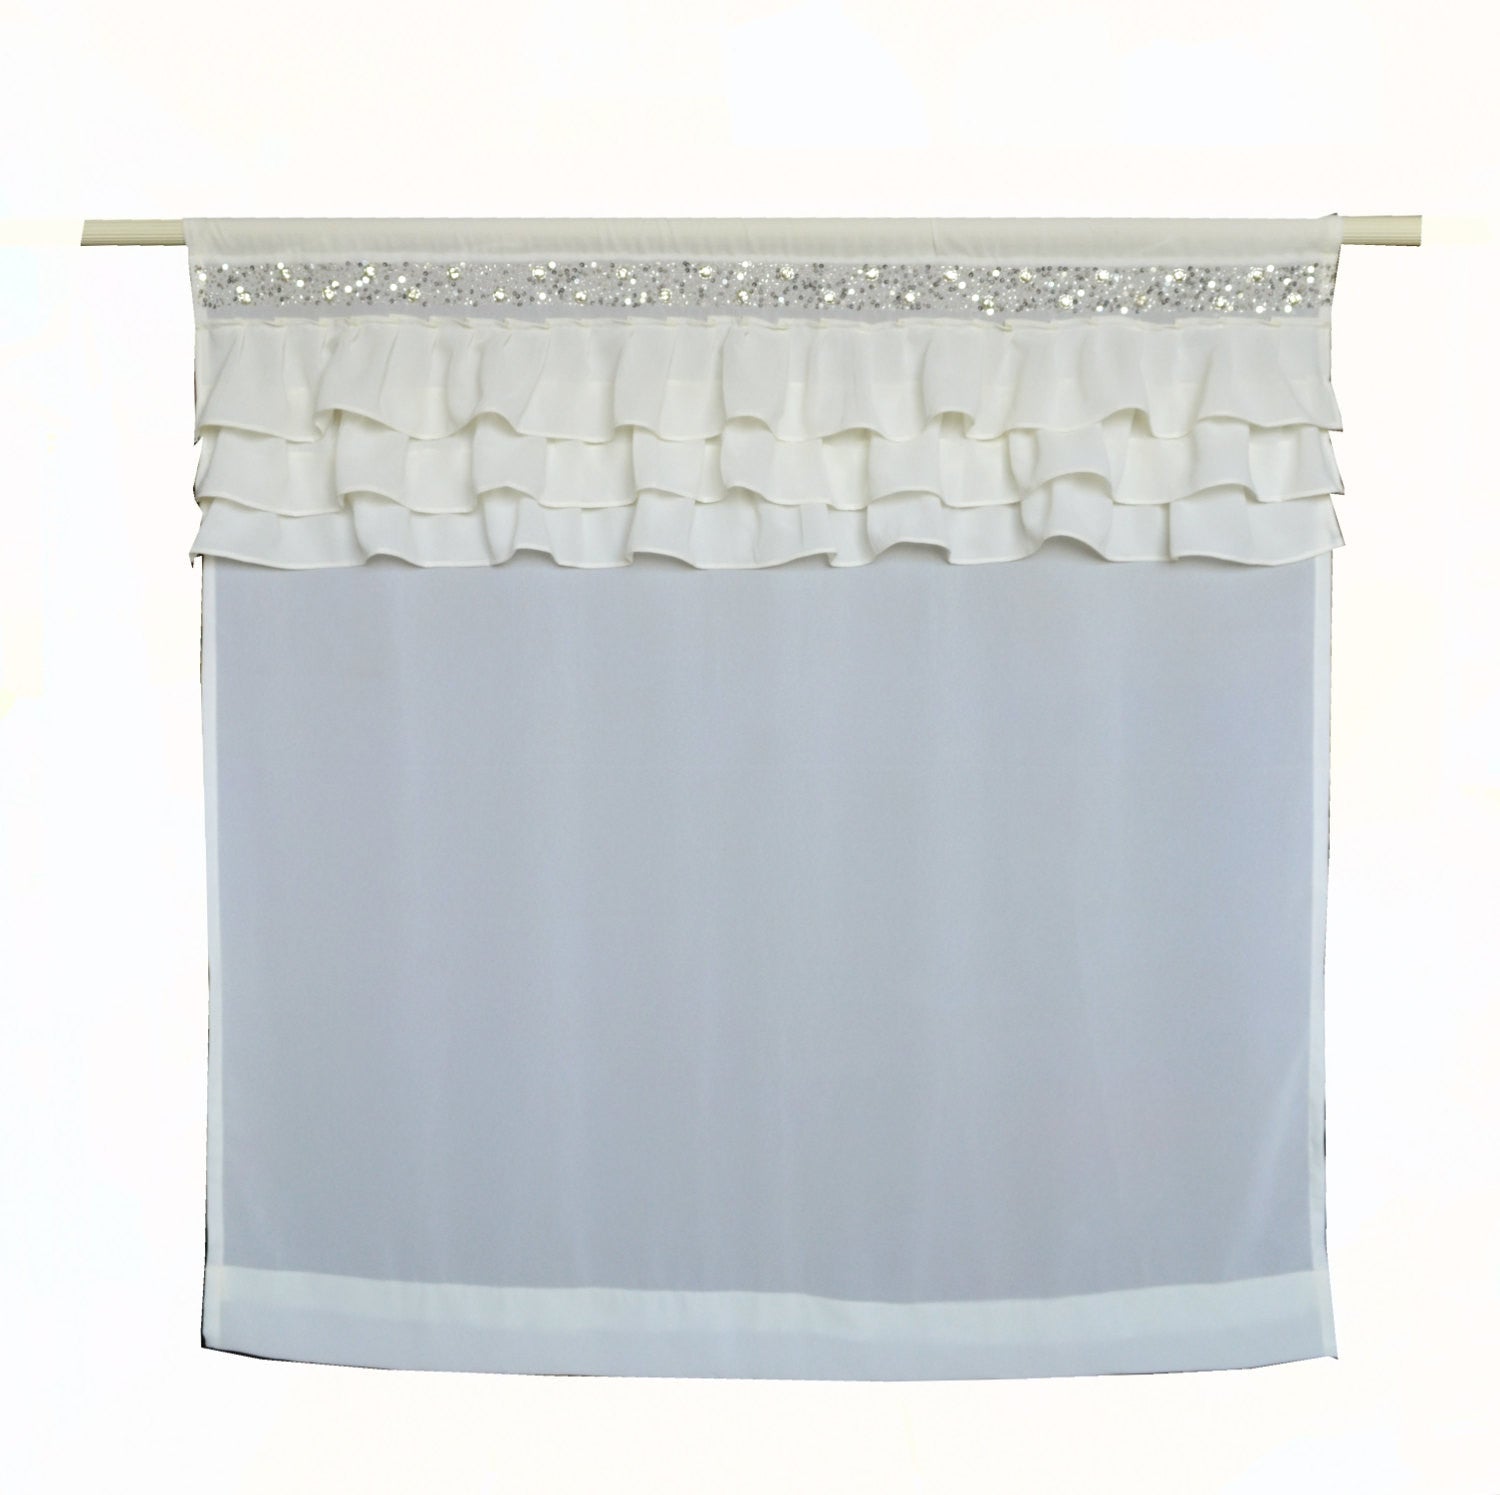 Amore Beaute Ivory Ruffle Georgette Sheer Curtains -Crystal Chic Luxury Ruffled Curtain Panel -Dorm Decor